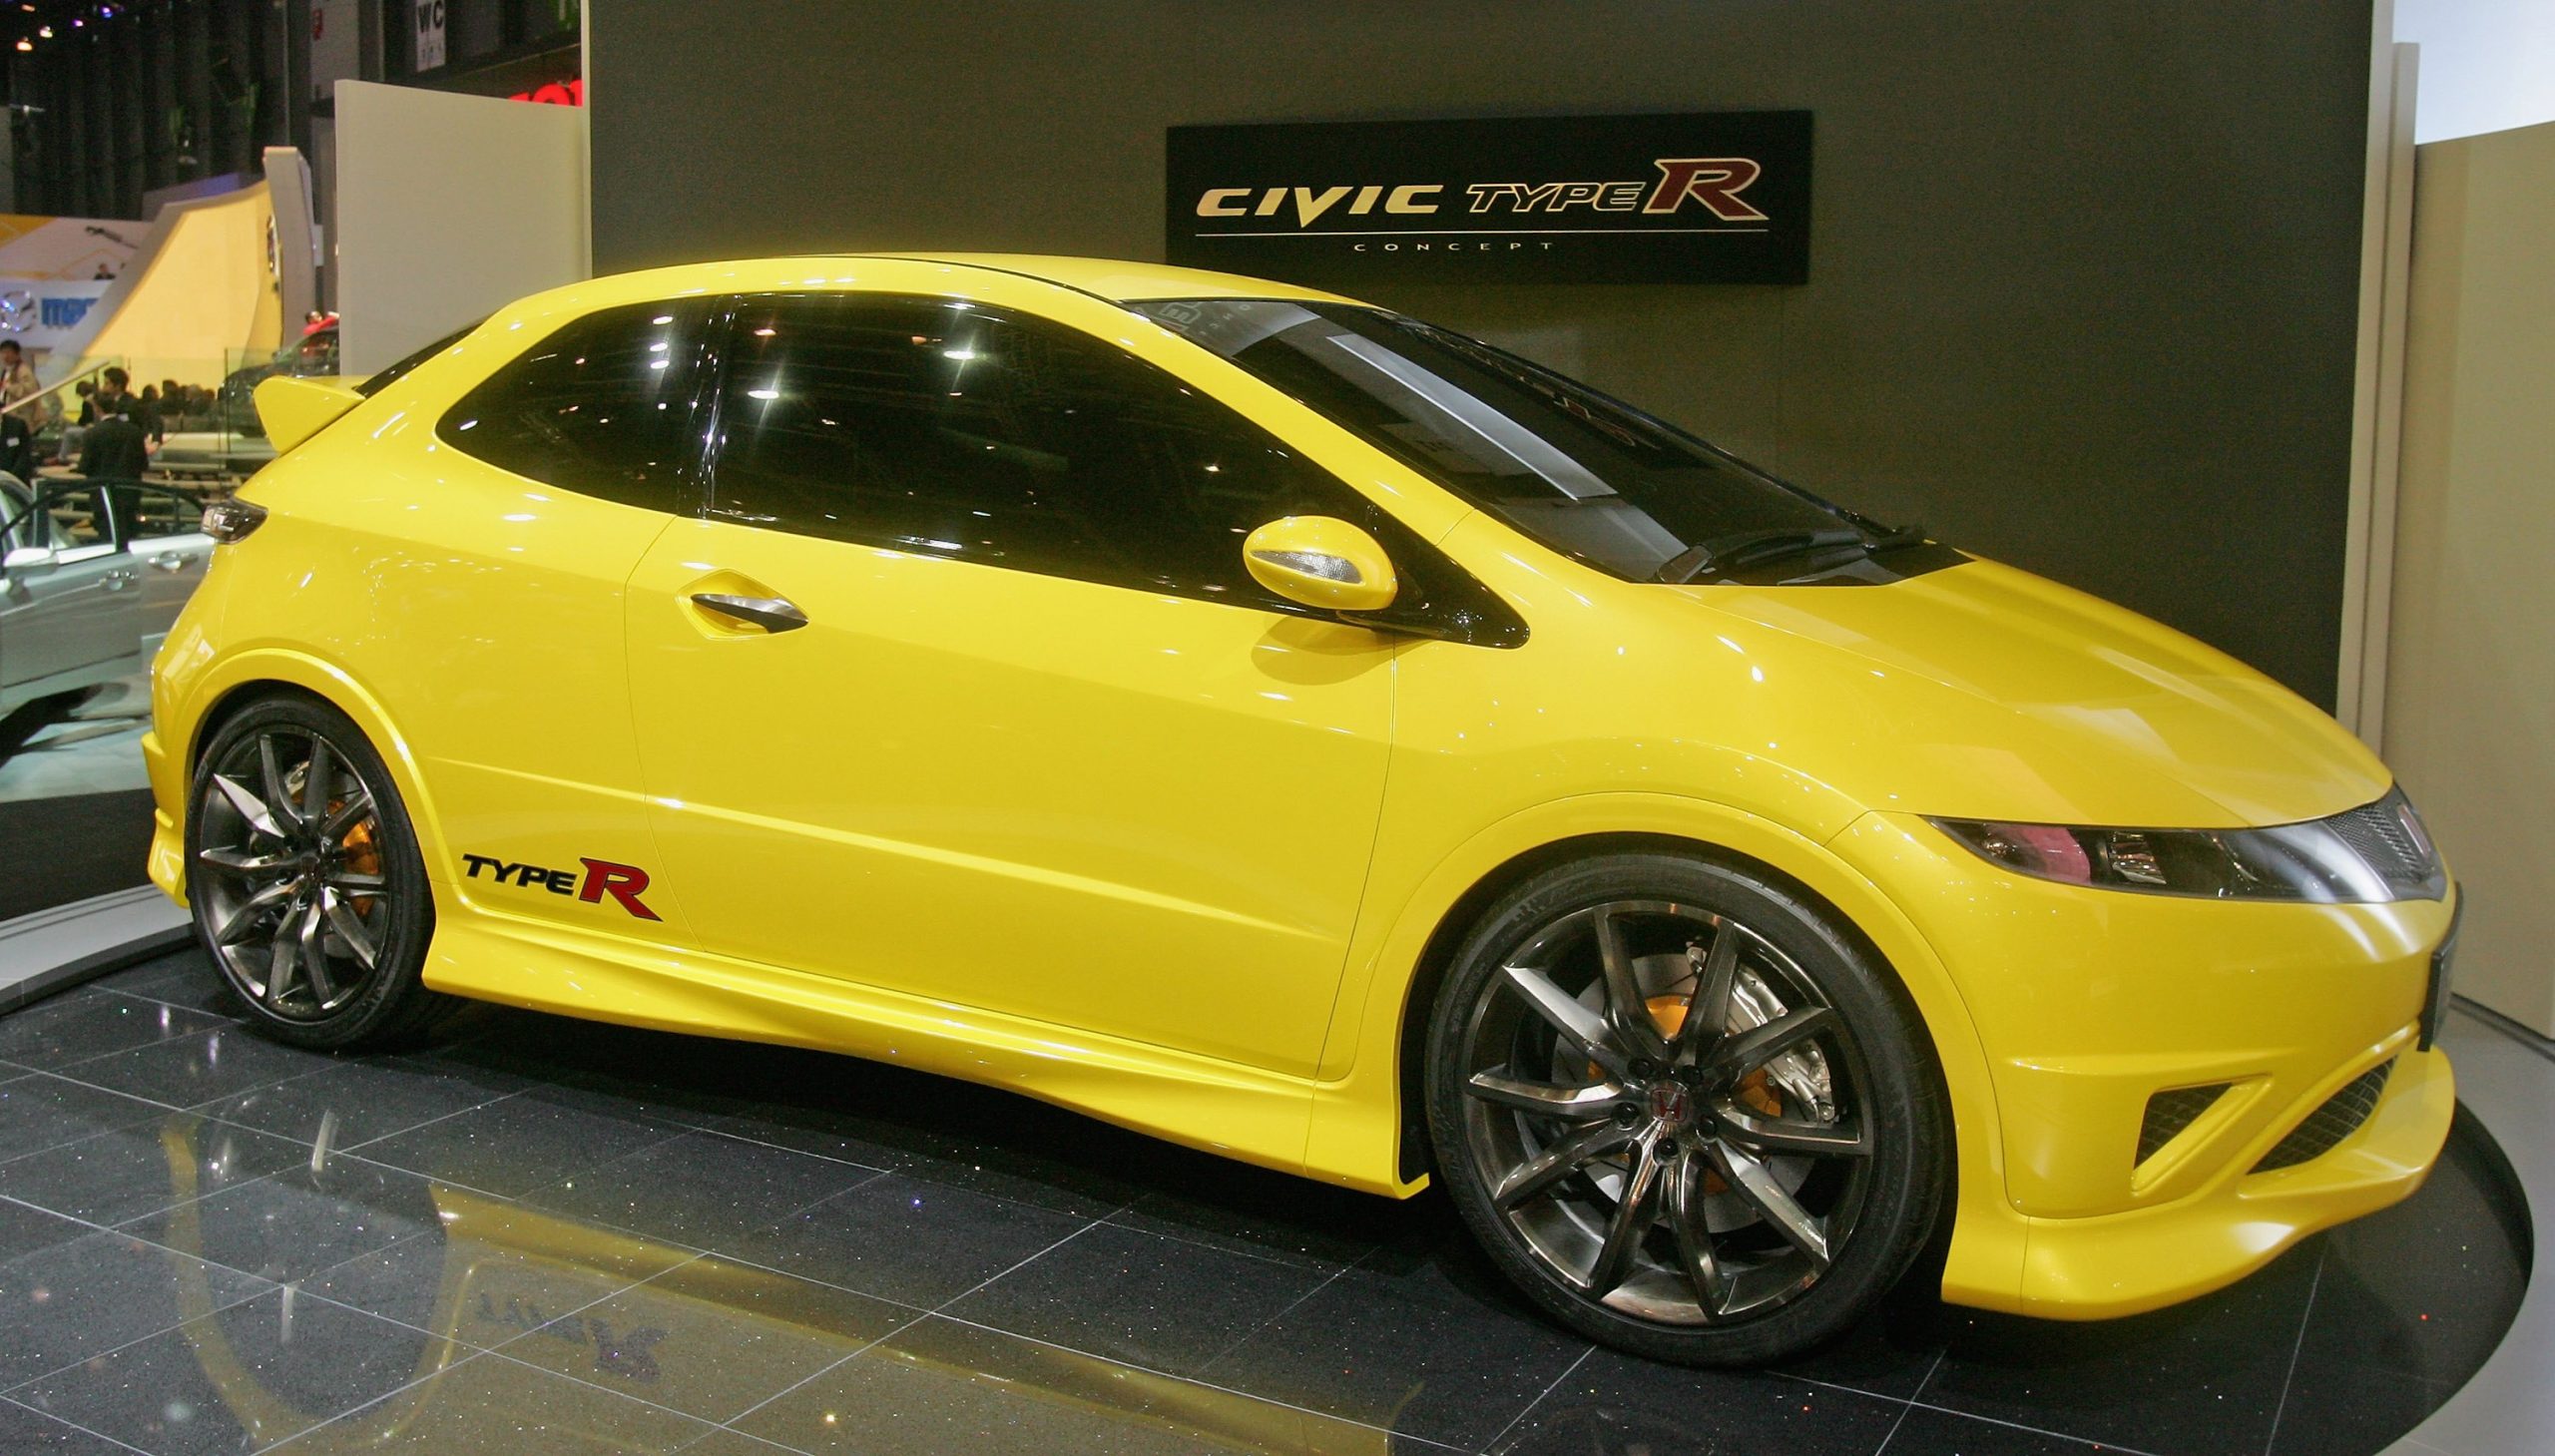 A yellow Honda Civic Type R on display at an auto show, shot in profile